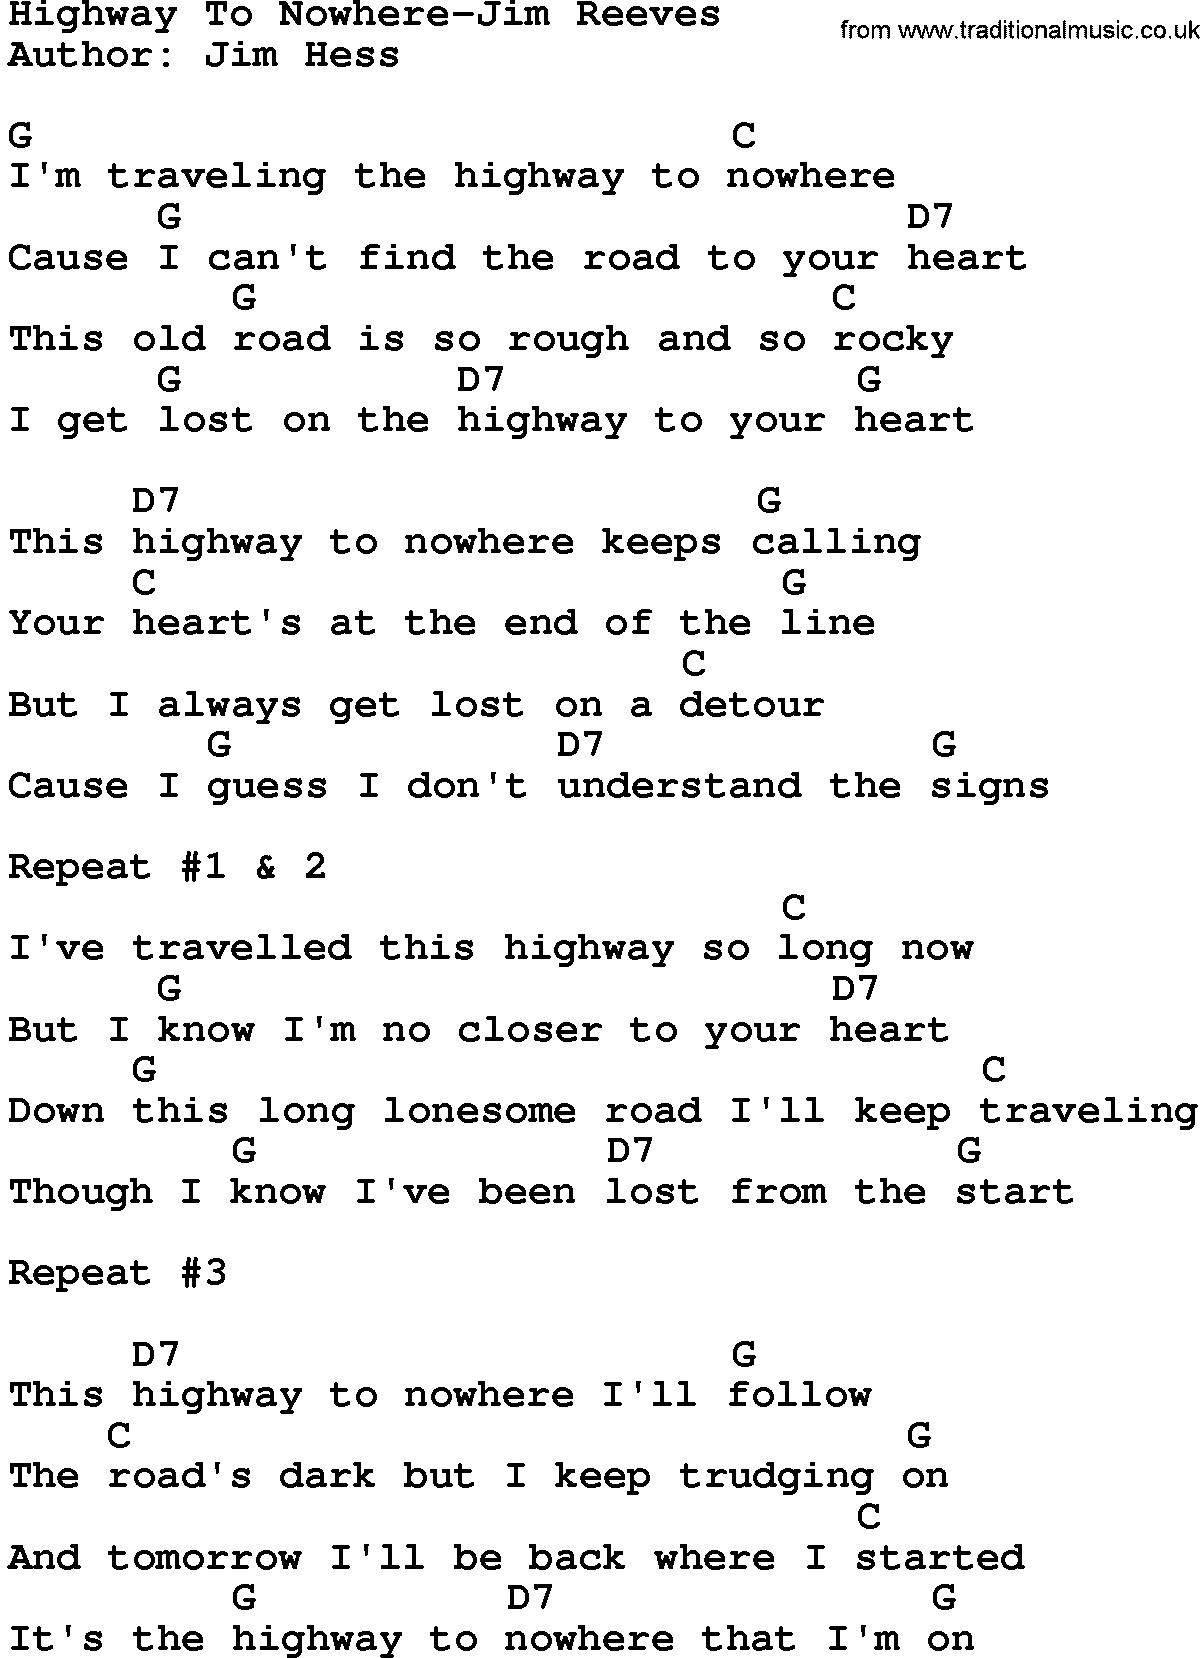 Country music song: Highway To Nowhere-Jim Reeves lyrics and chords